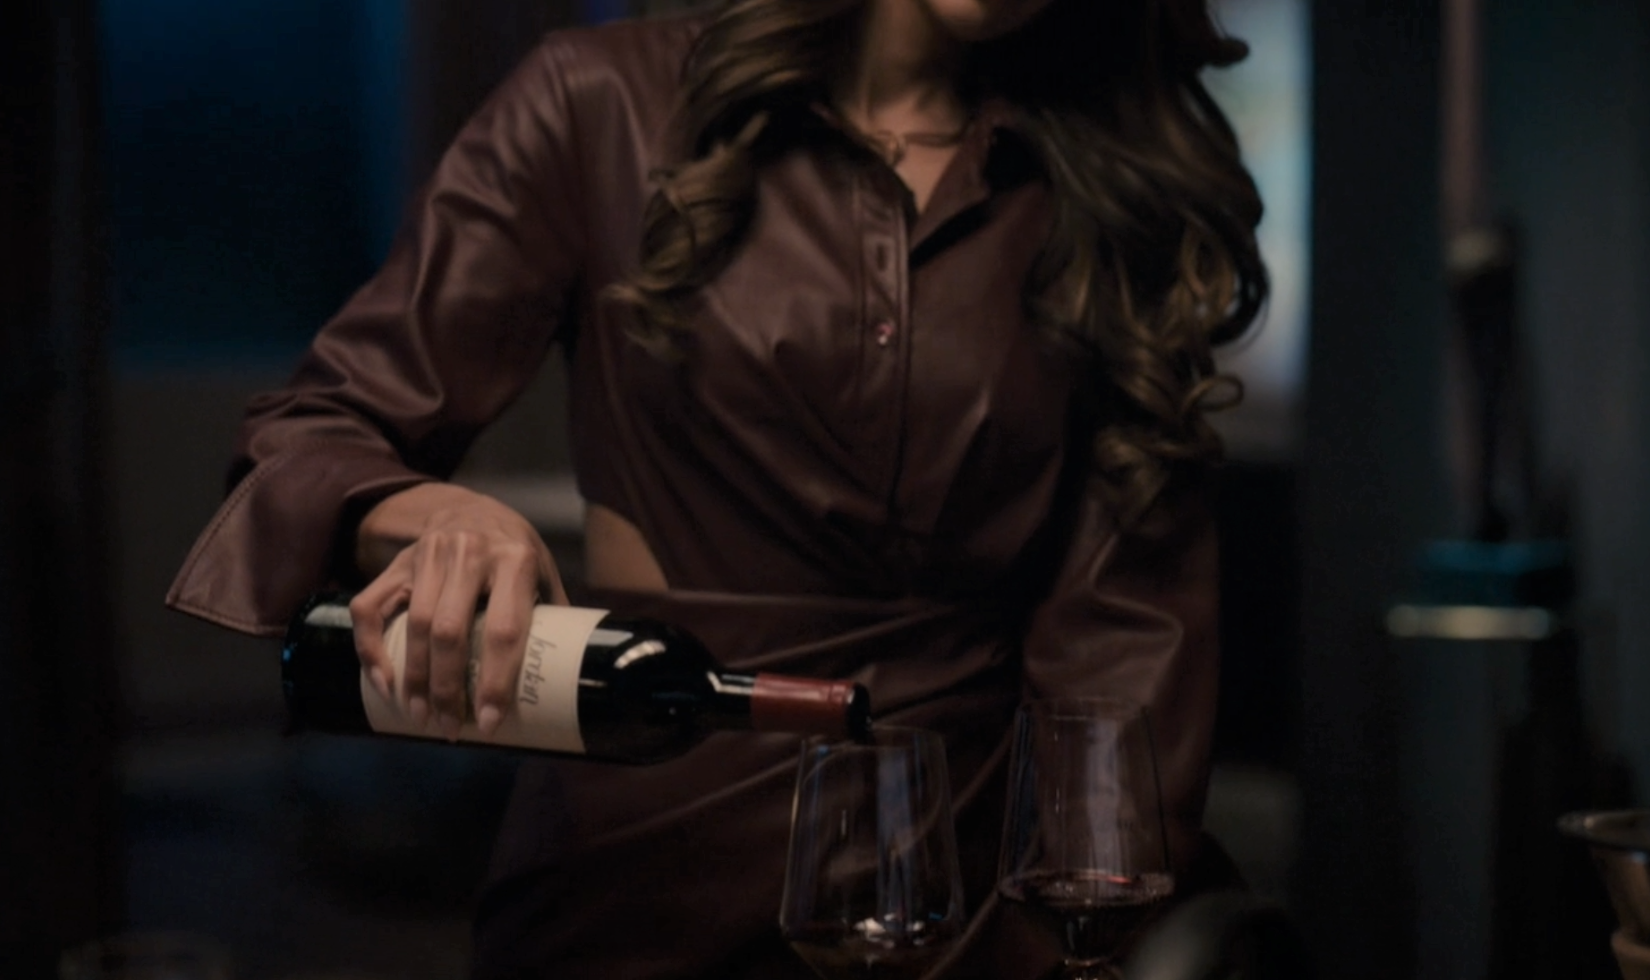 Screenshot from the TV series The Company You Keep, showing a woman pouring a glass of Jordan Cabernet Sauvignon